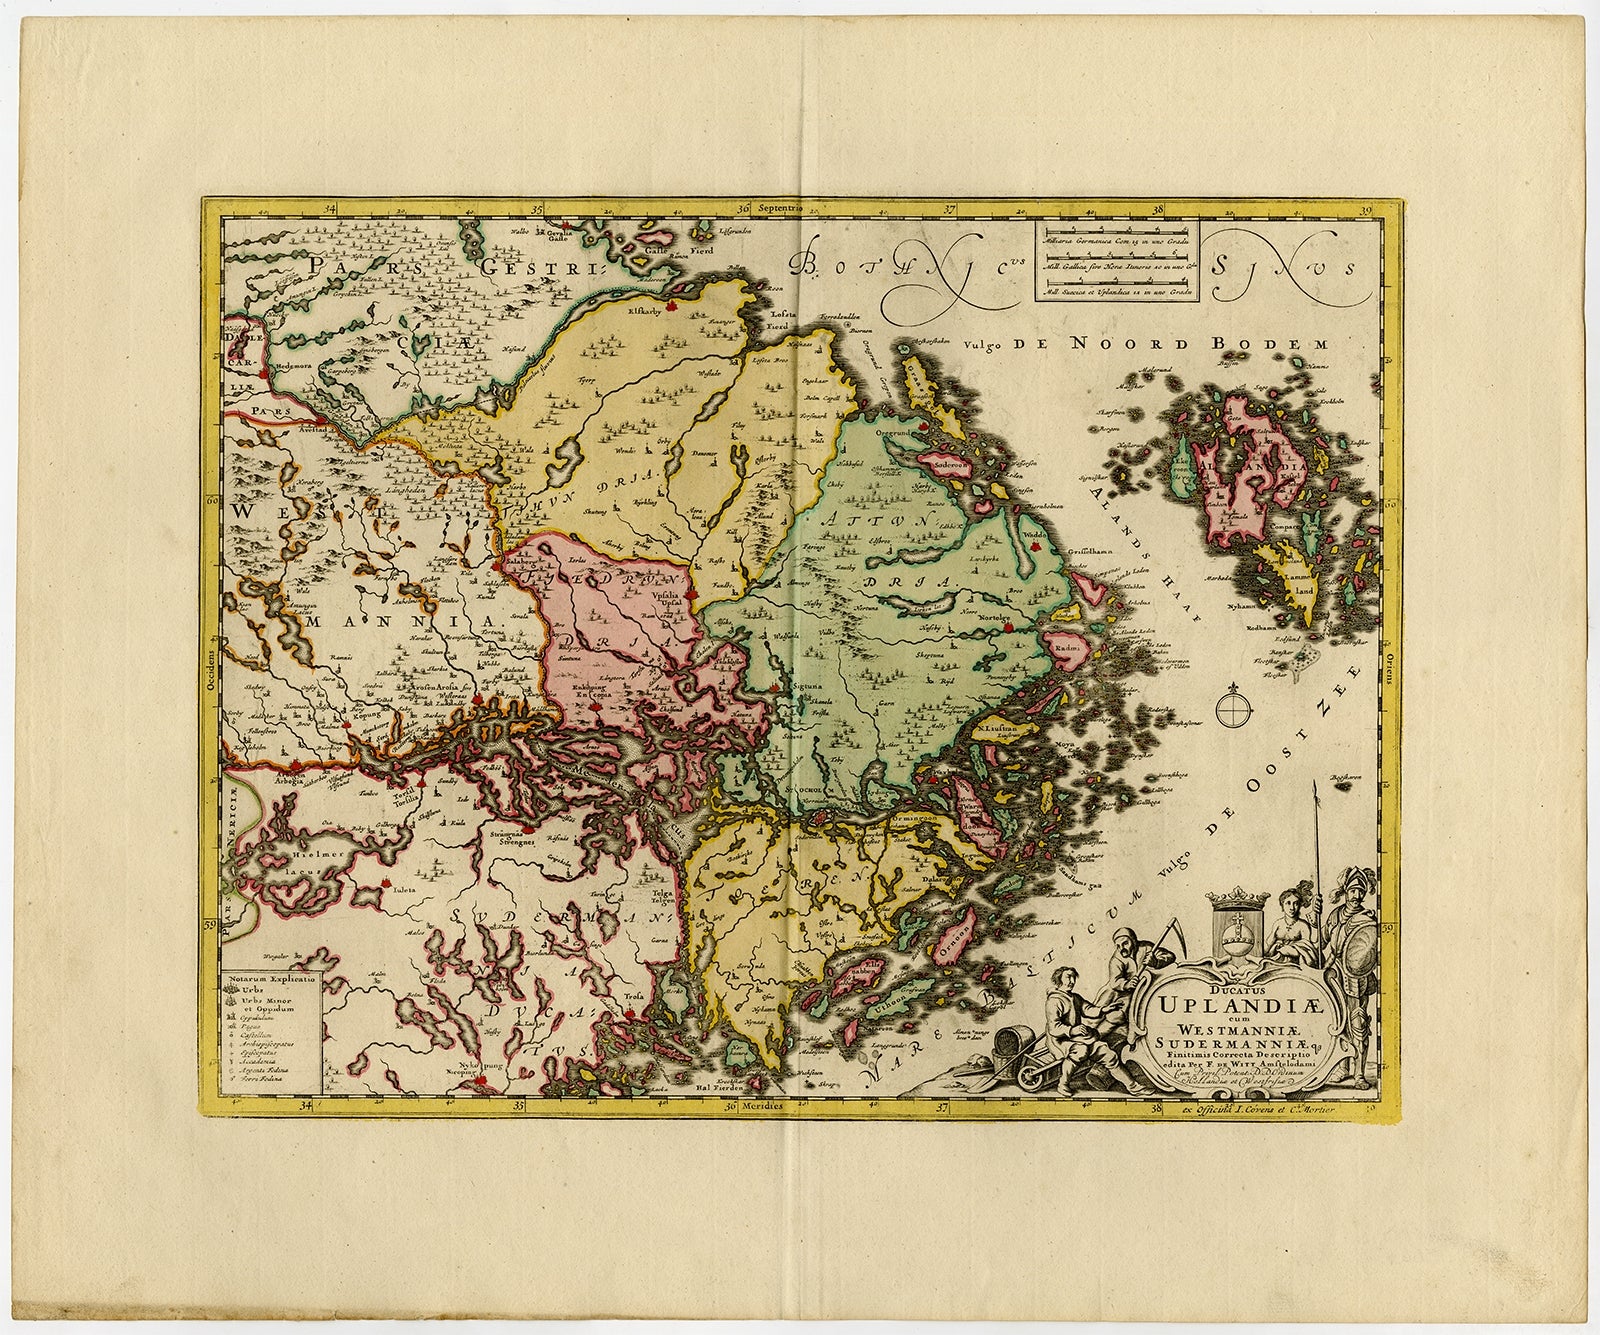 Antique map titled 'Ducatus Uplandiae cum Westmanniae Sudermanniae (..)' 

This map shows parts of Finland and Sweden. Originally published by Frederick de Wit in the late 1600's. This map was probably part of a composite atlas published